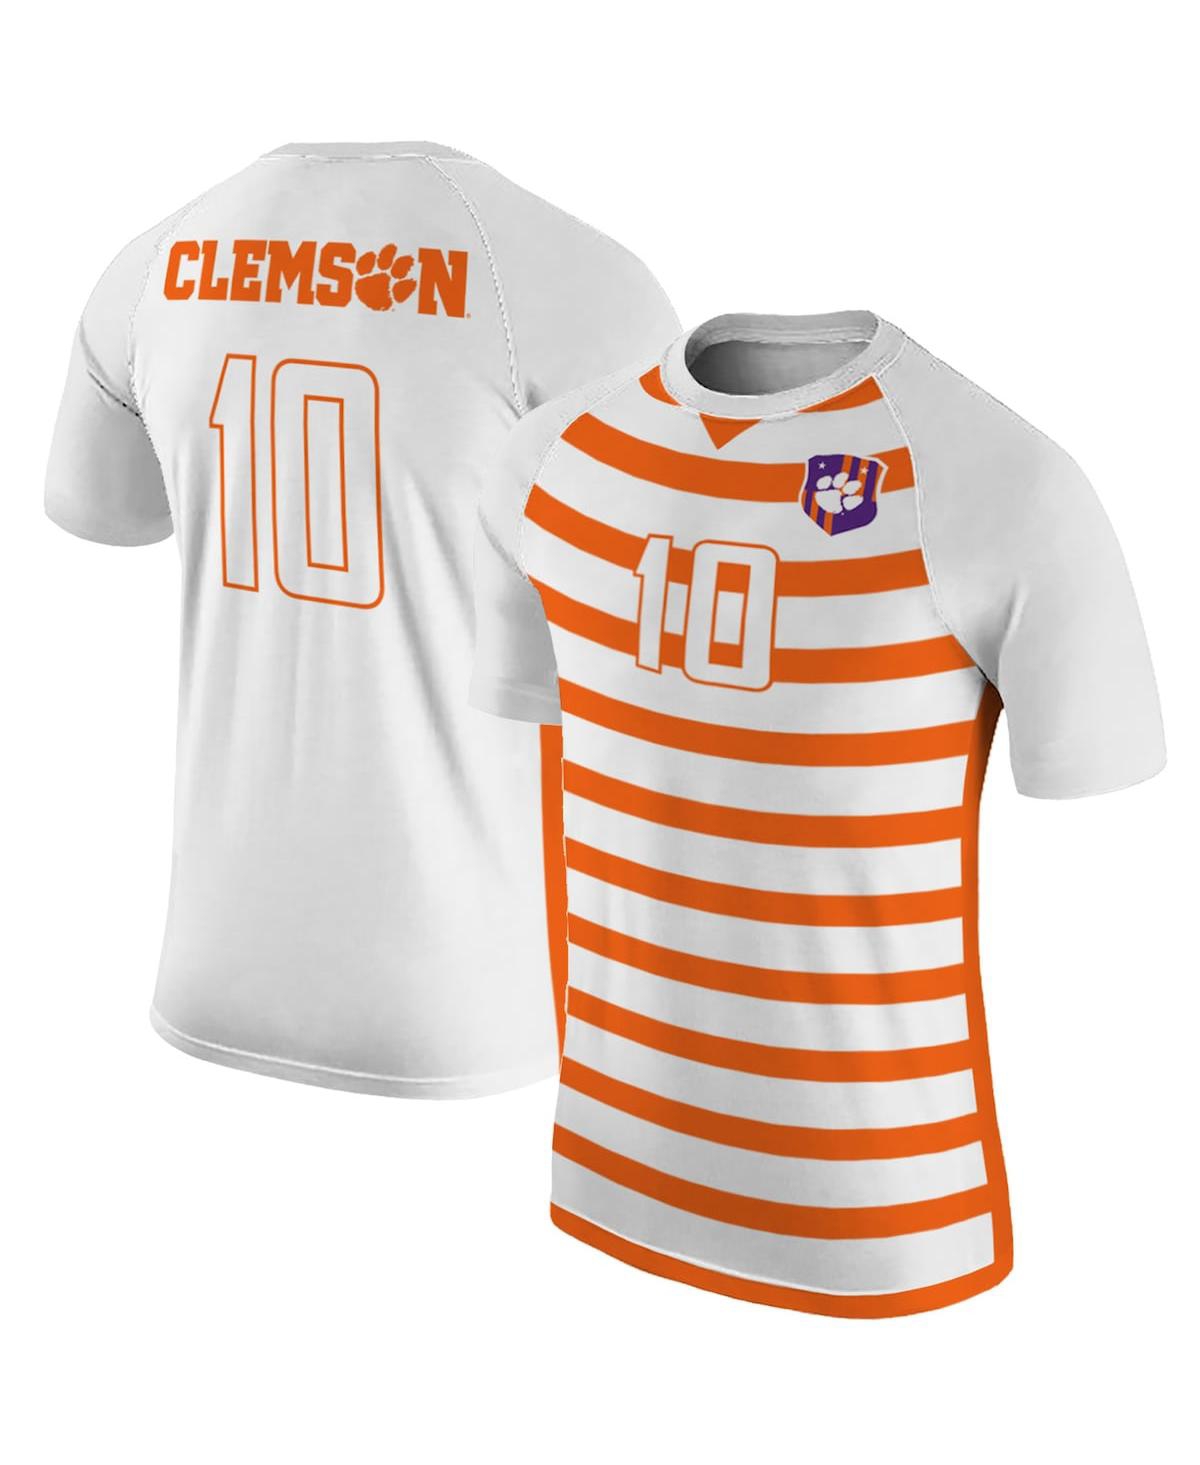 Men's Number 10 White Clemson Tigers Soccer Jersey - White